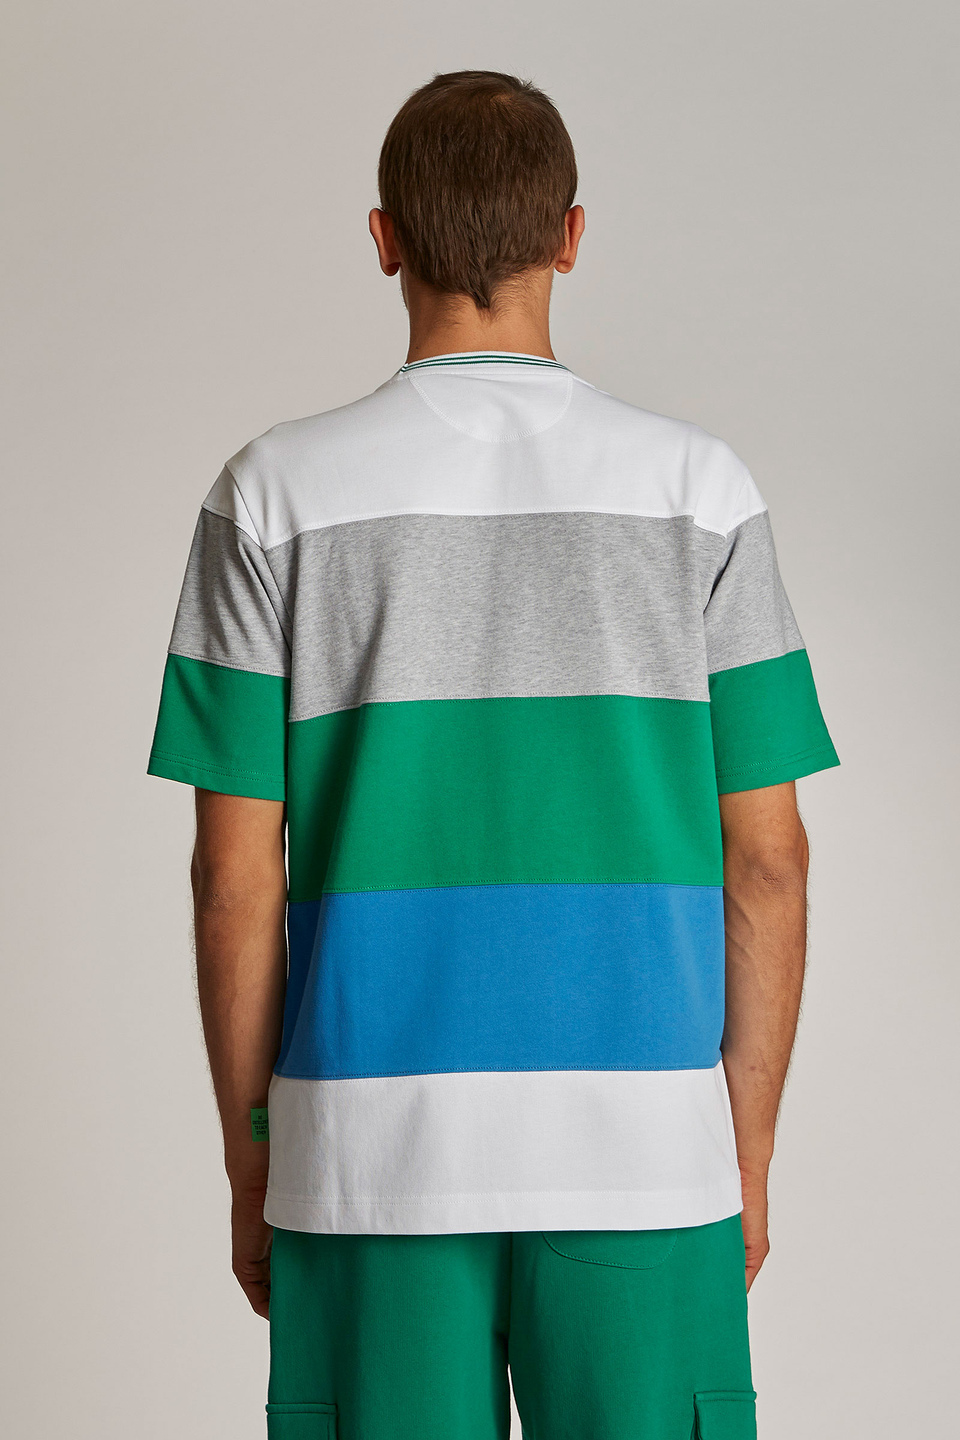 Men's oversized short-sleeved T-shirt featuring a contrasting collar - La Martina - Official Online Shop